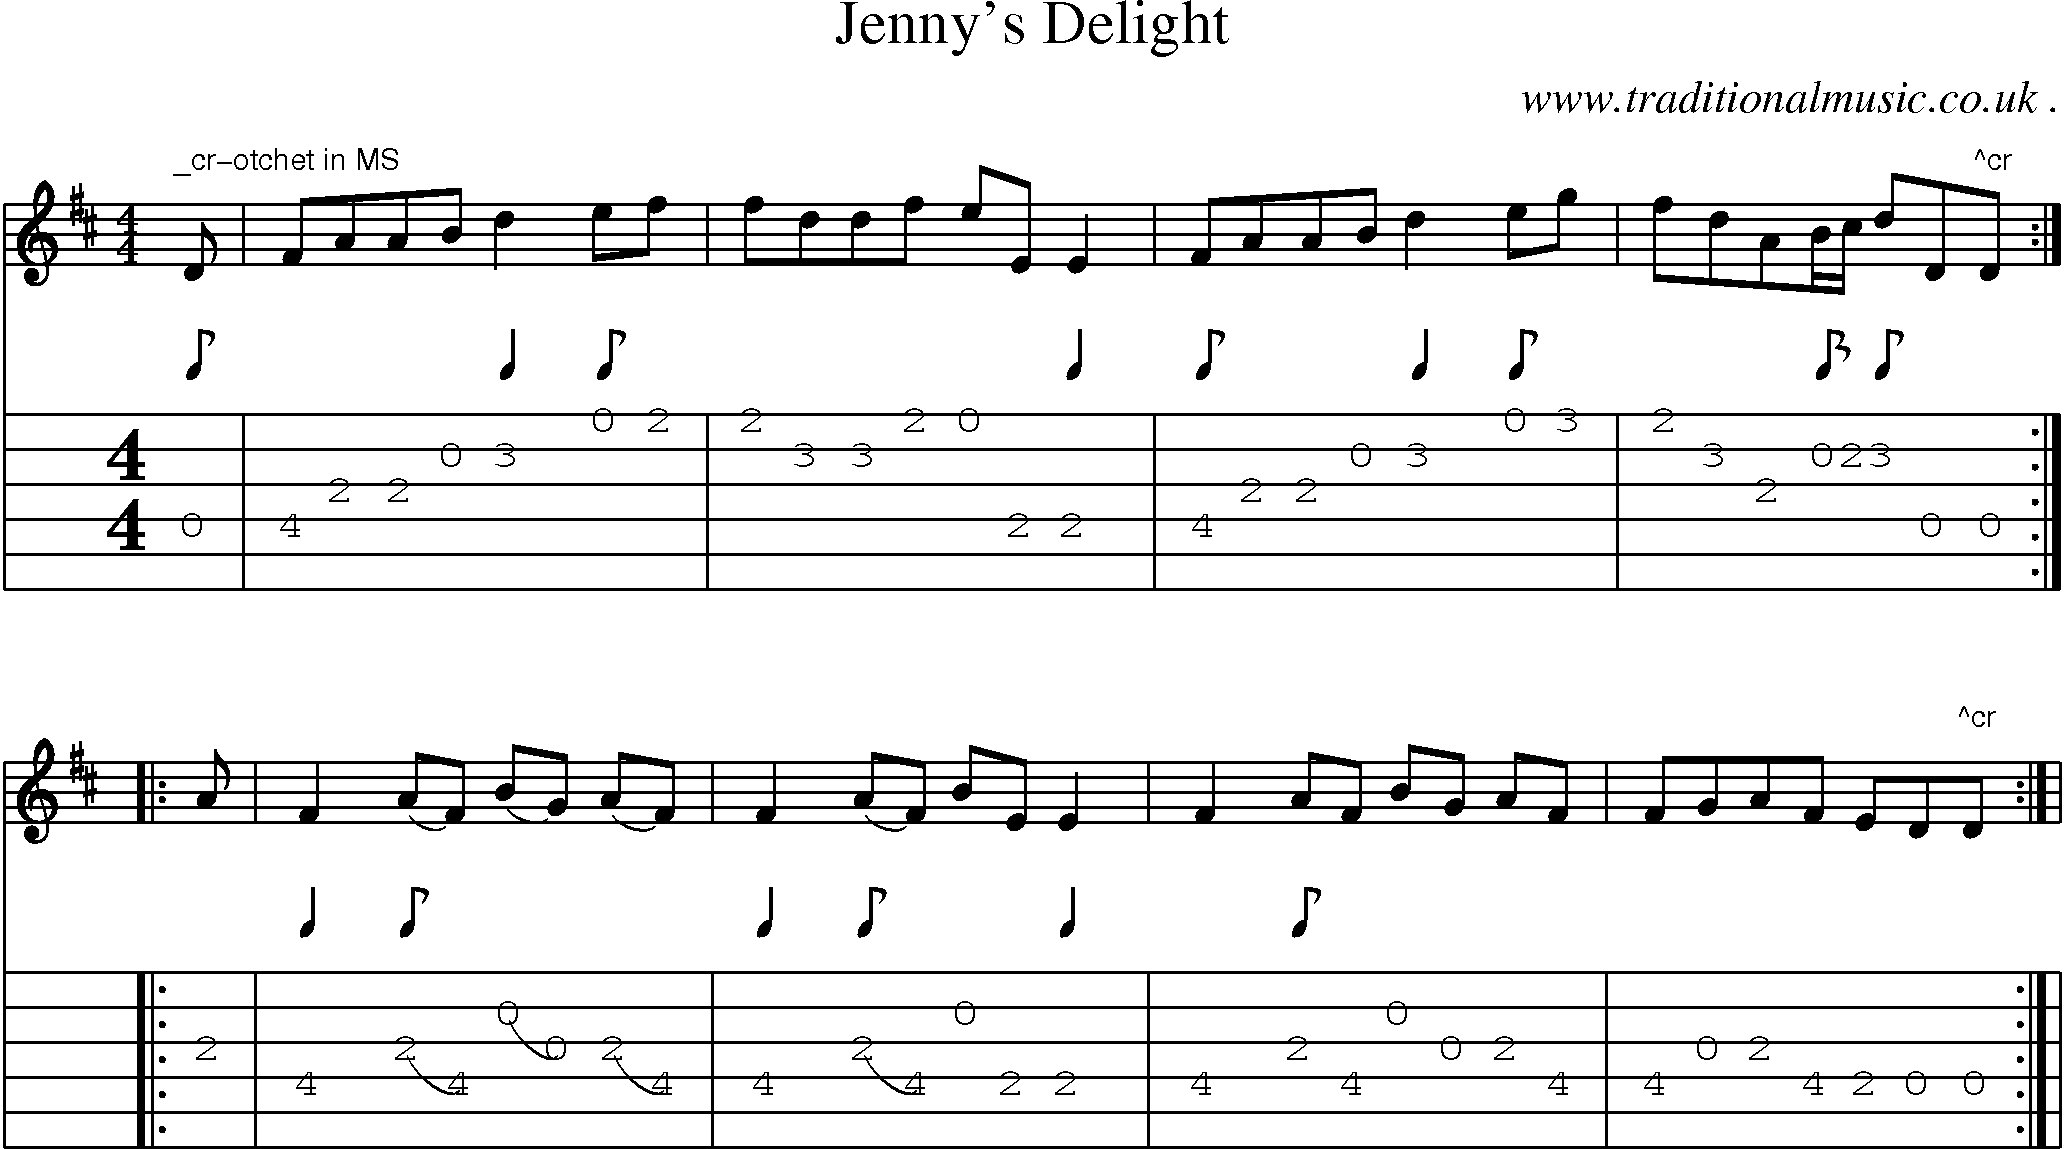 Sheet-Music and Guitar Tabs for Jennys Delight